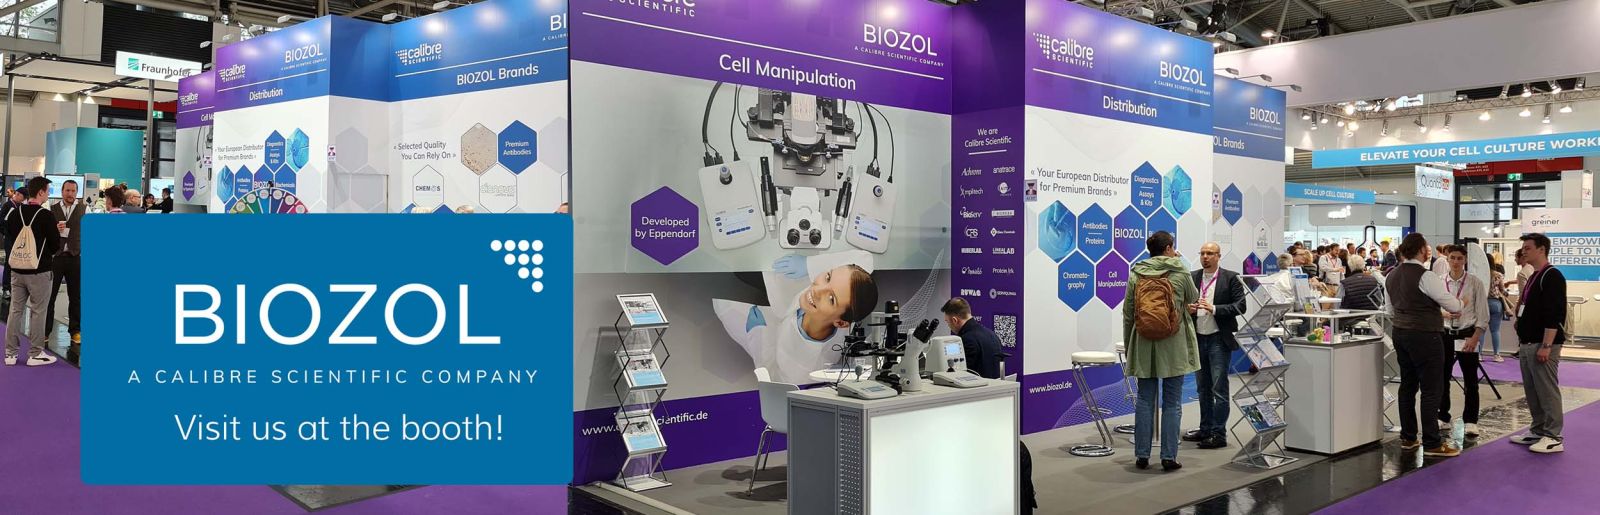 Meet us at the BIOZOL booth